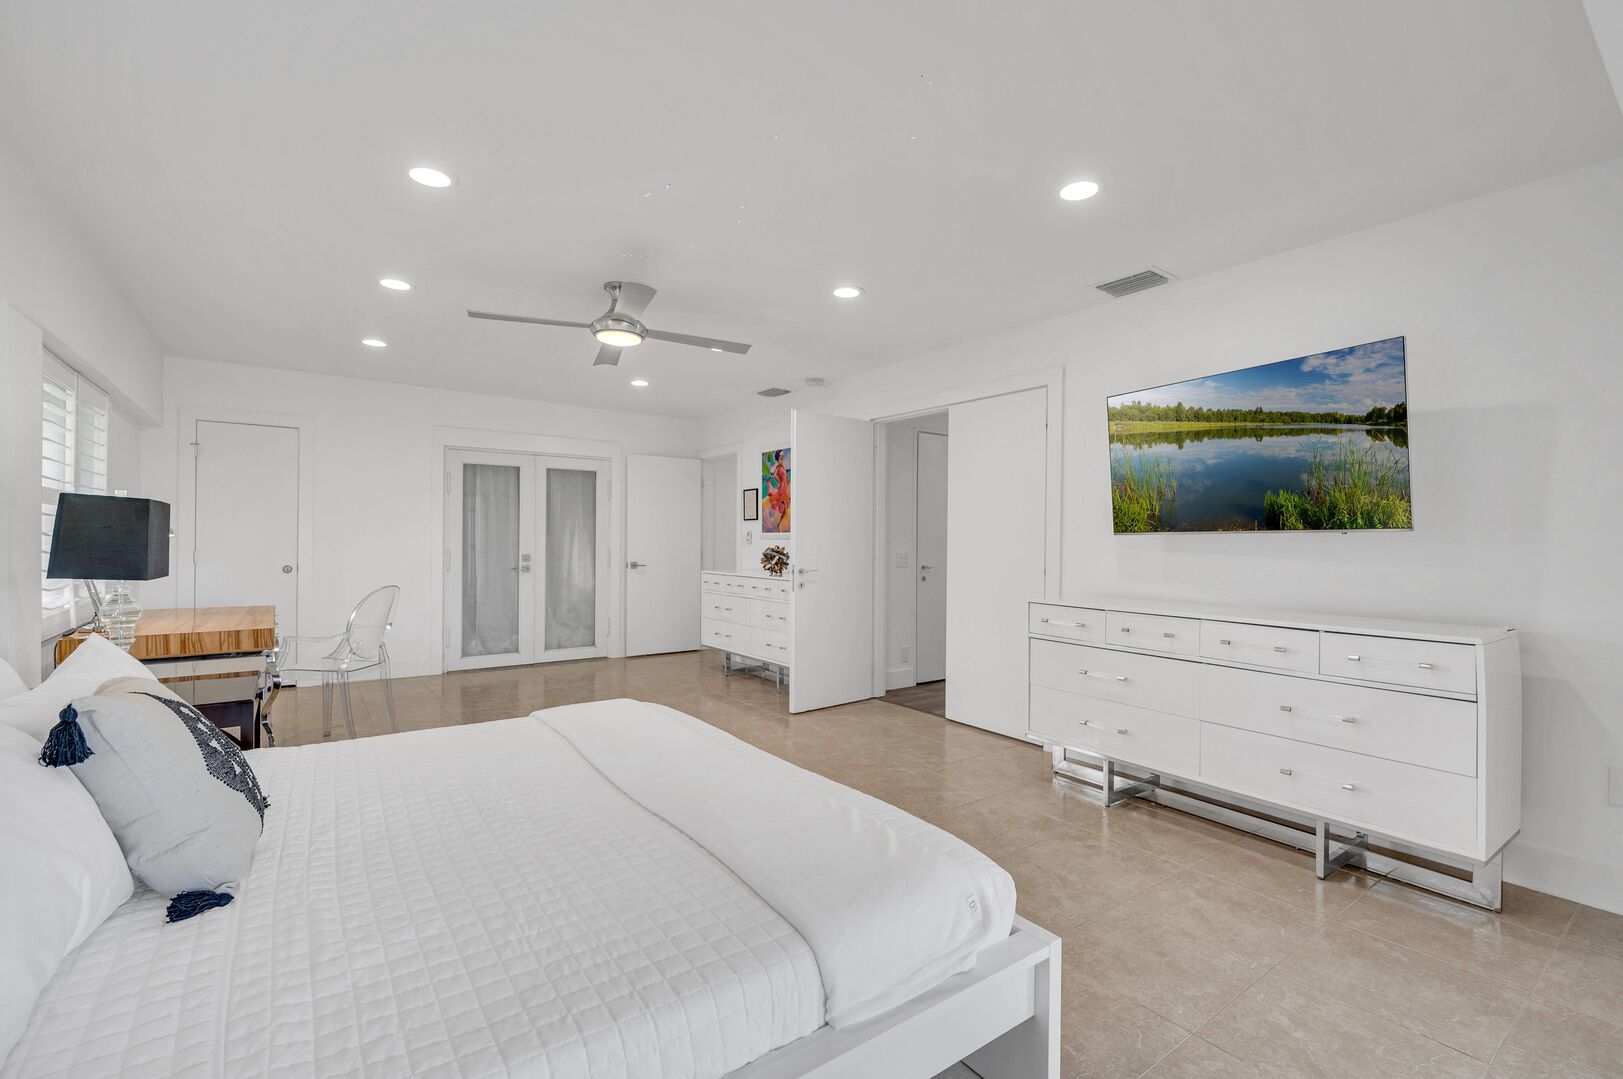 The primary bedroom boasting waterfront views features a king size bed, Smart TV, and a desk.